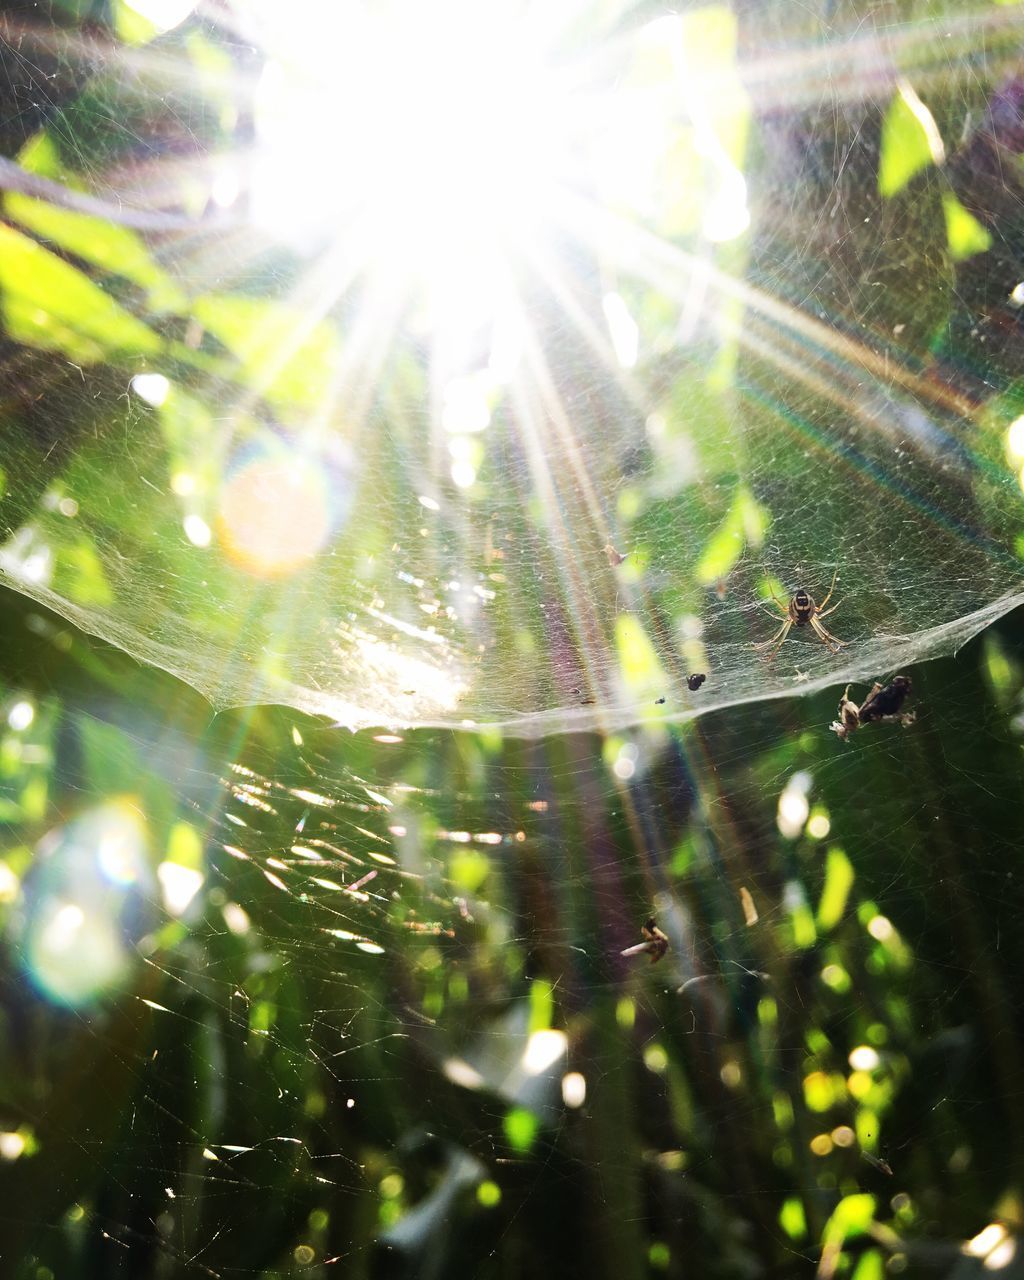 CLOSE-UP OF SPIDER WEB AMIDST PLANTS